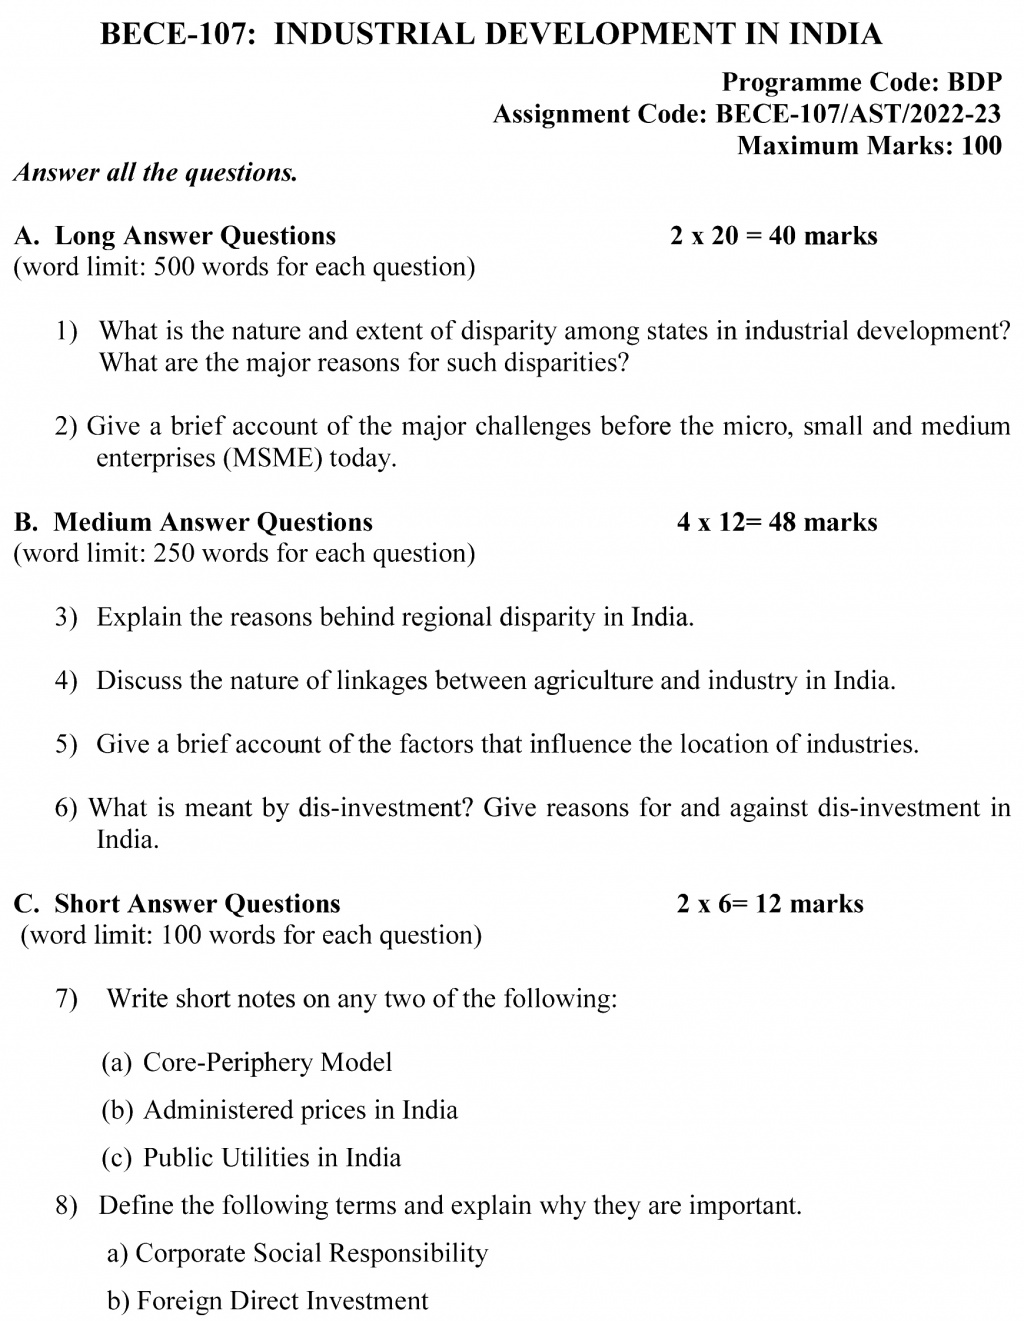 IGNOU BECE-107 - Industrial Development in India, Latest Solved Assignment-July 2022 – January 2023